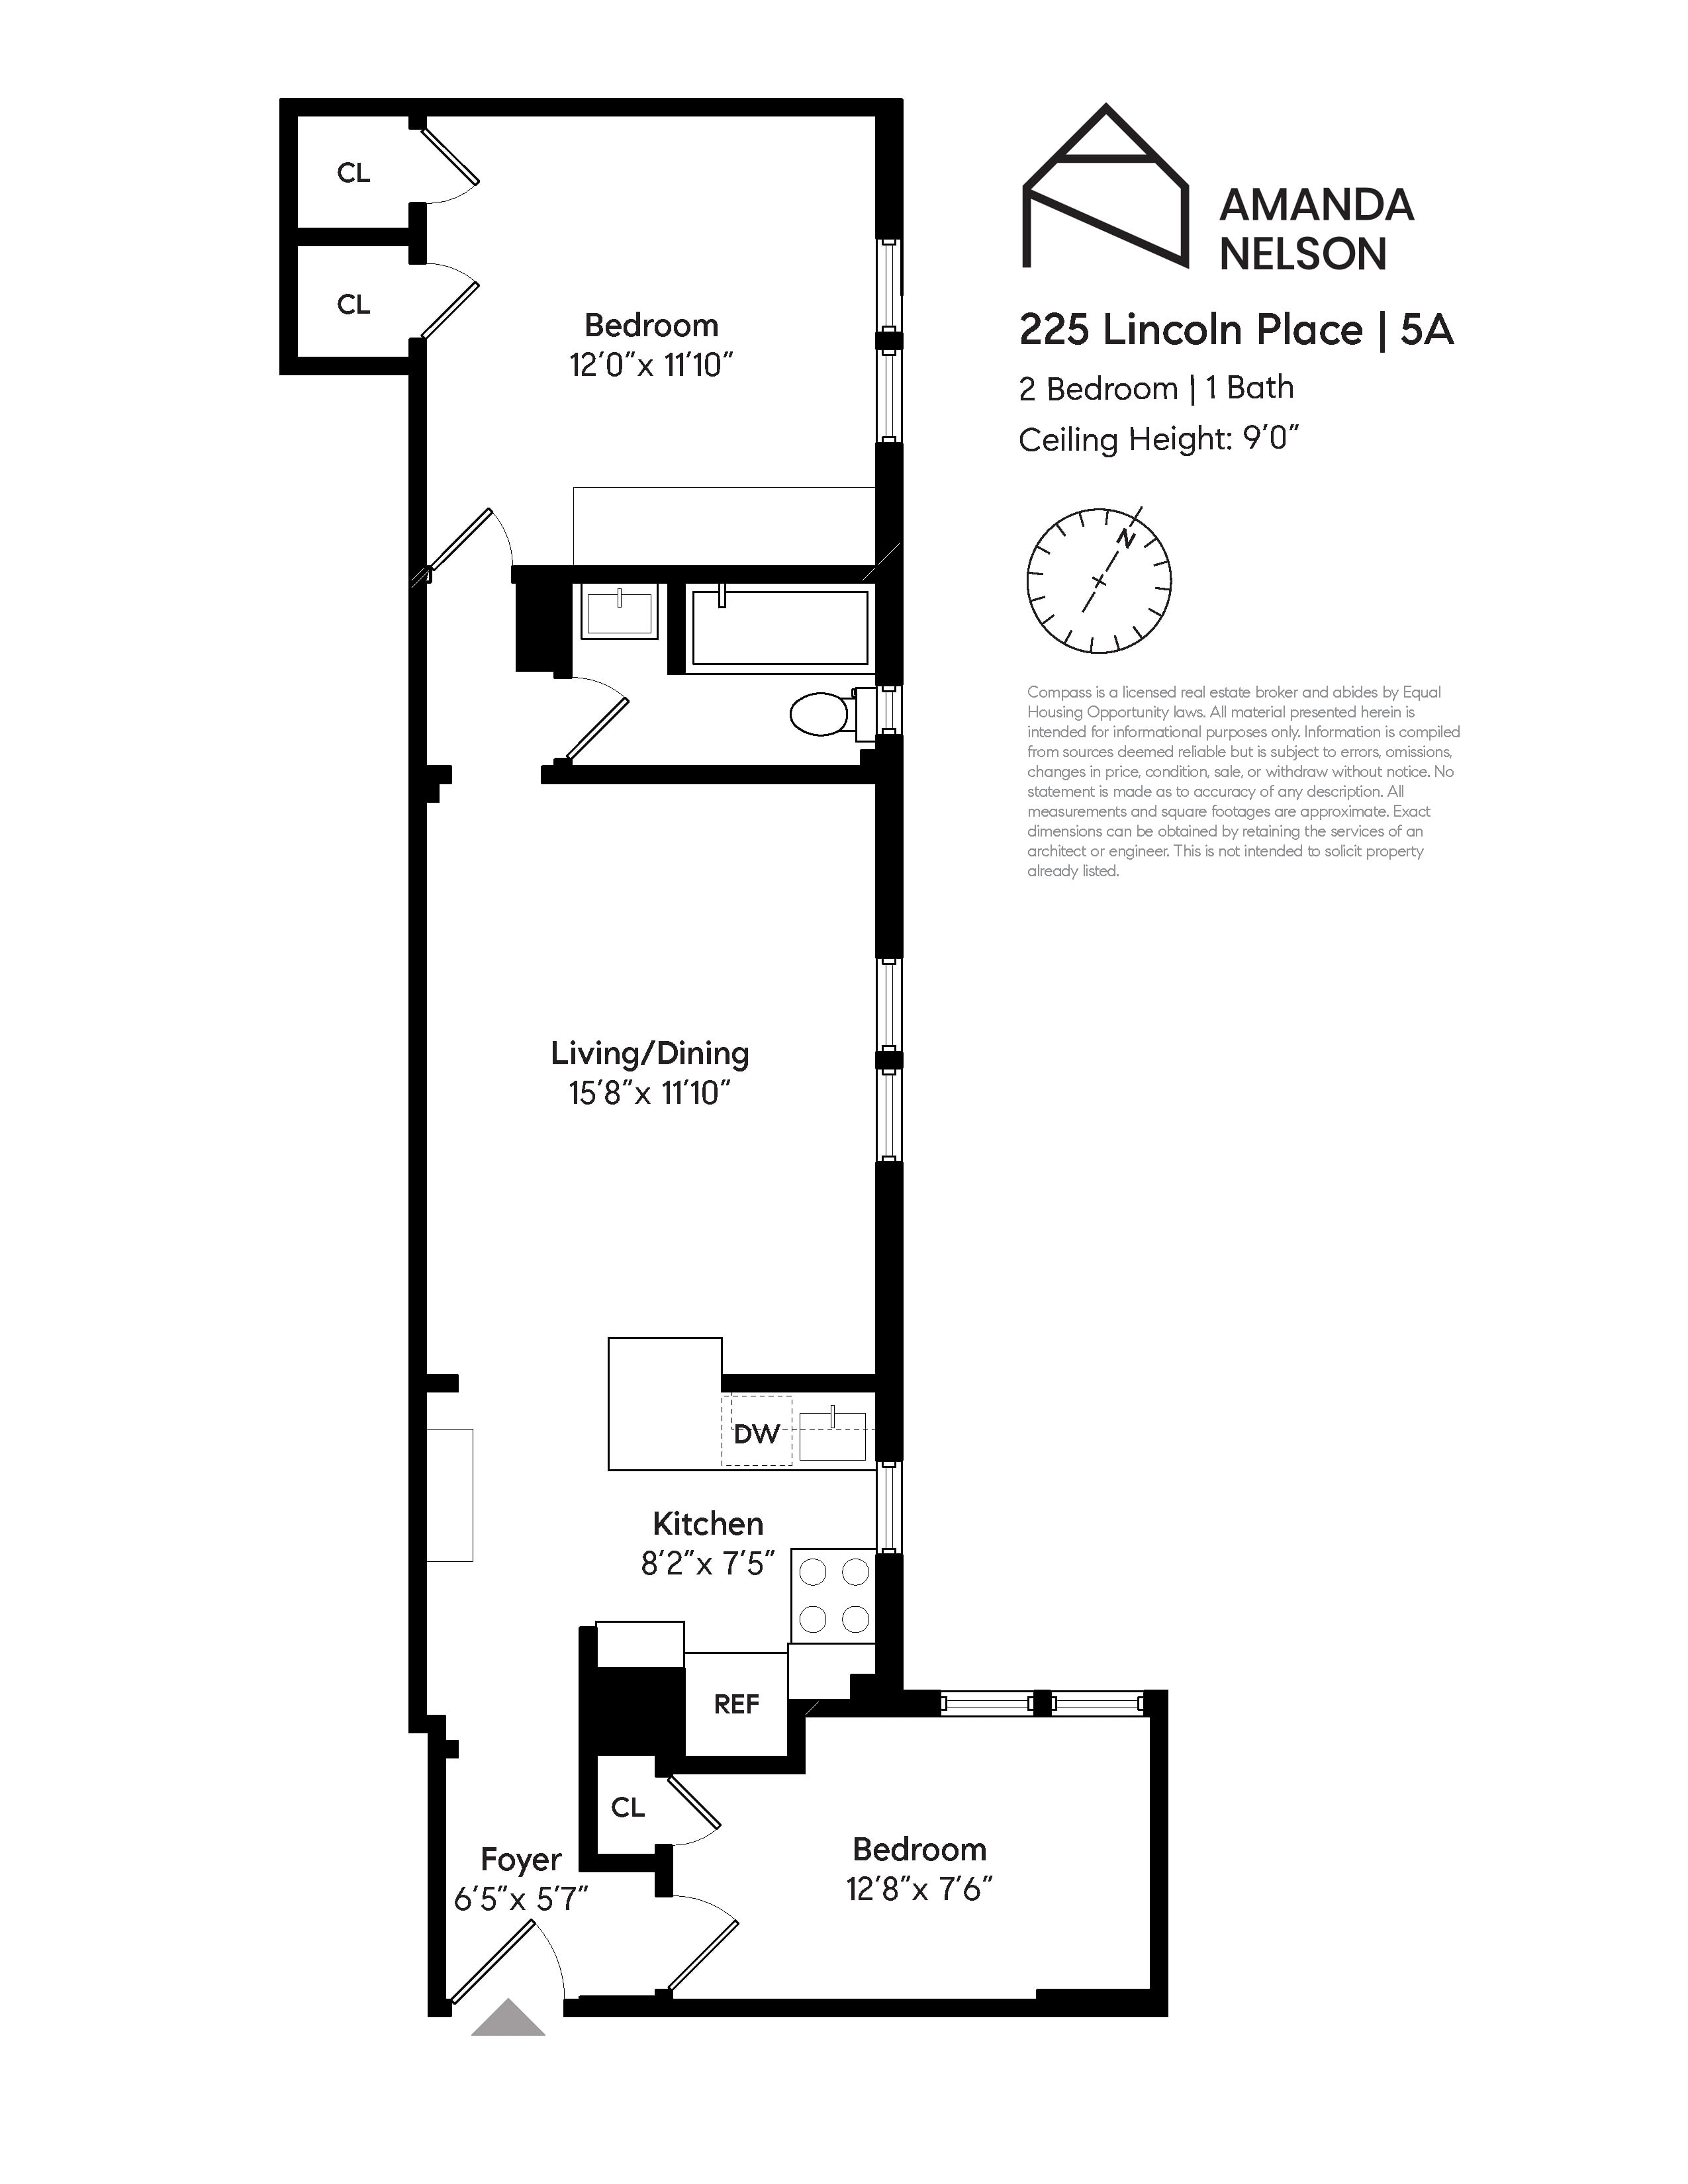 Floorplan for 225 Lincoln Place, 5A